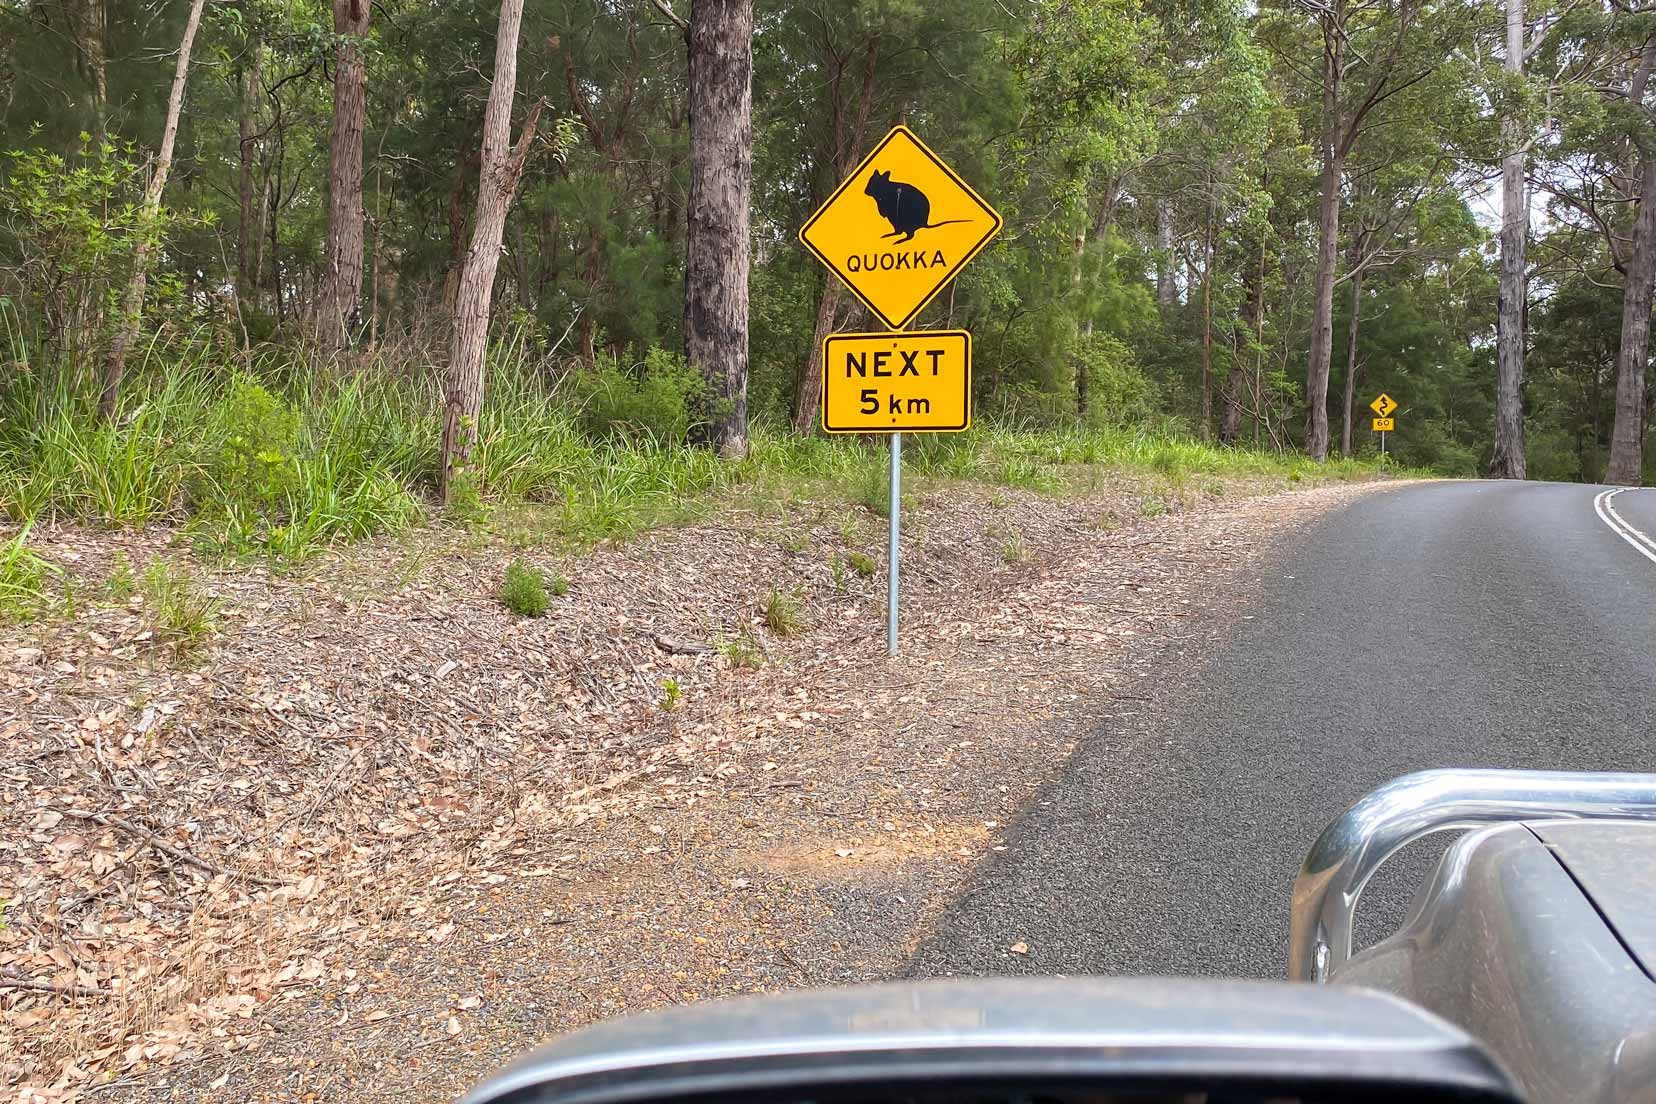 Sign on the road leading to the valley of the giants showing a quokka and Next 5 km